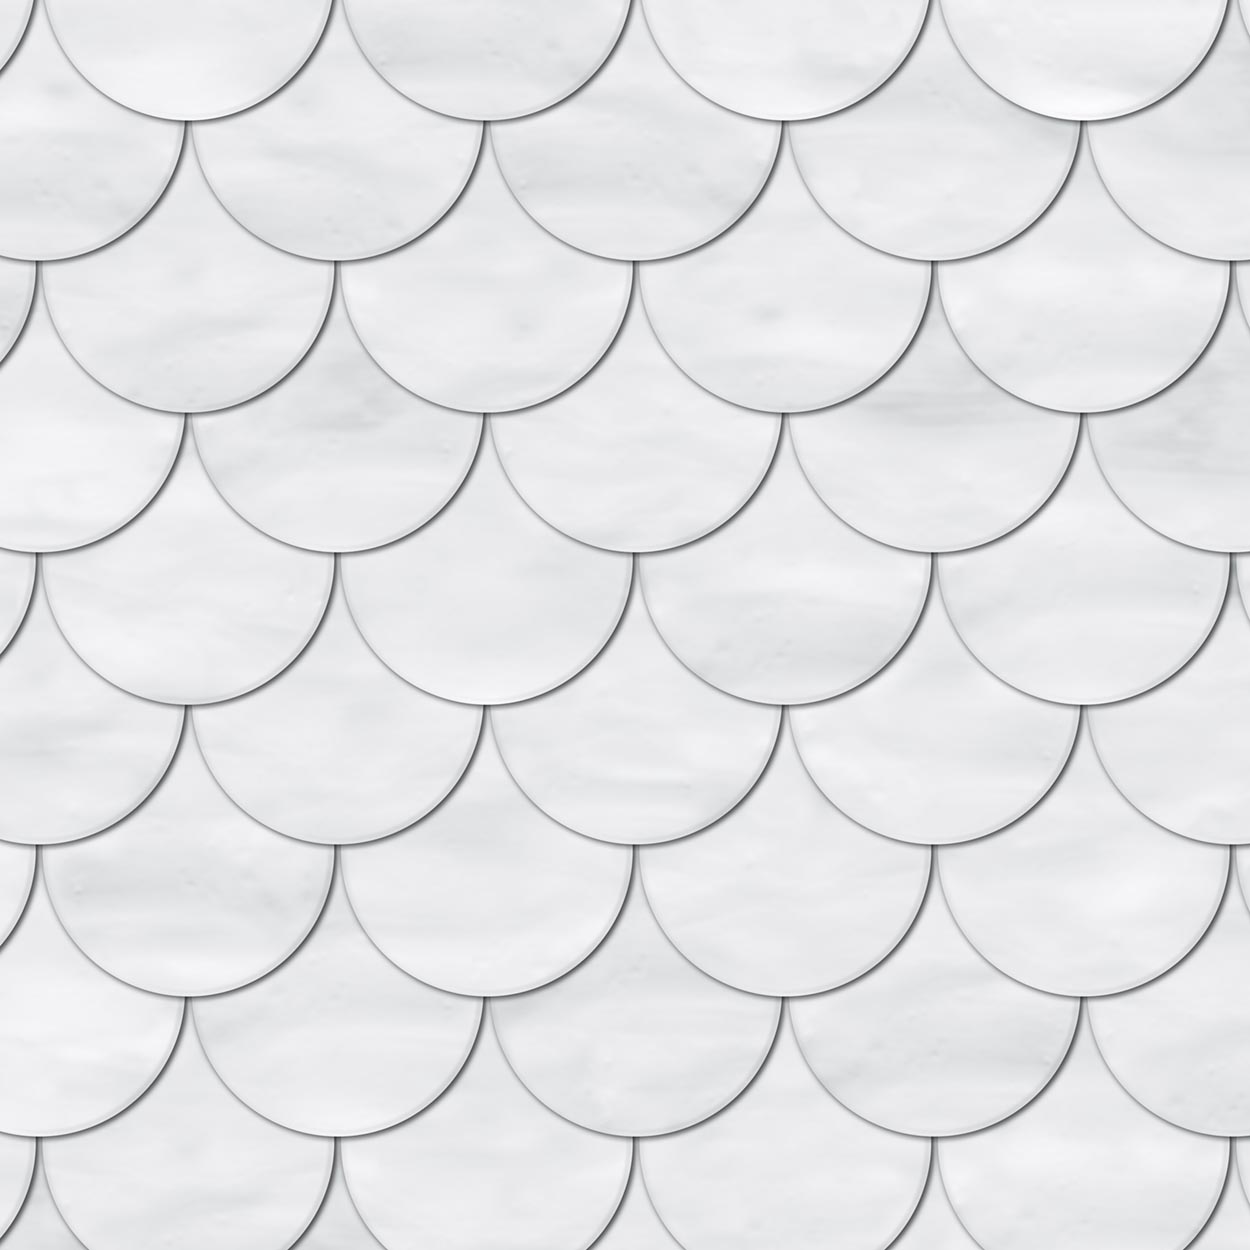 Round Overlapping Tile